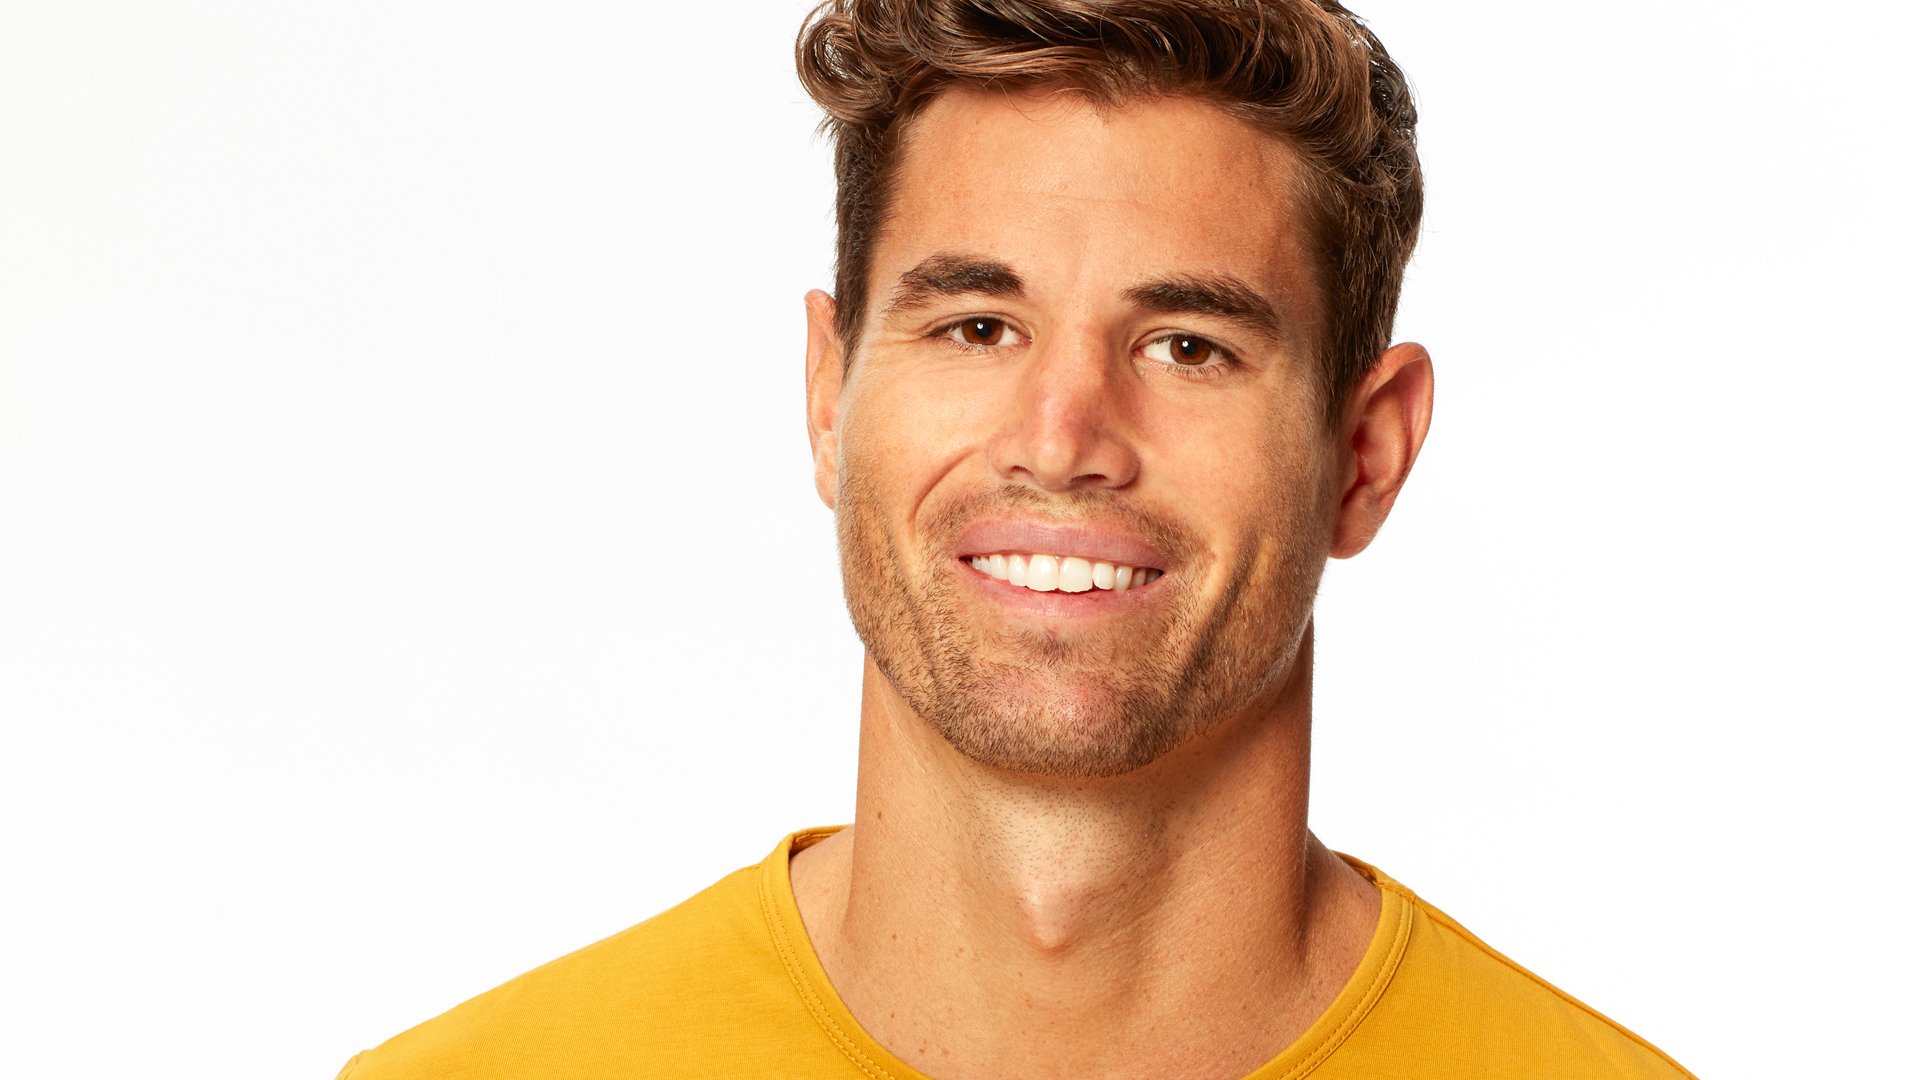 Chasen from 'The Bachelorette' Season 16 in 2020